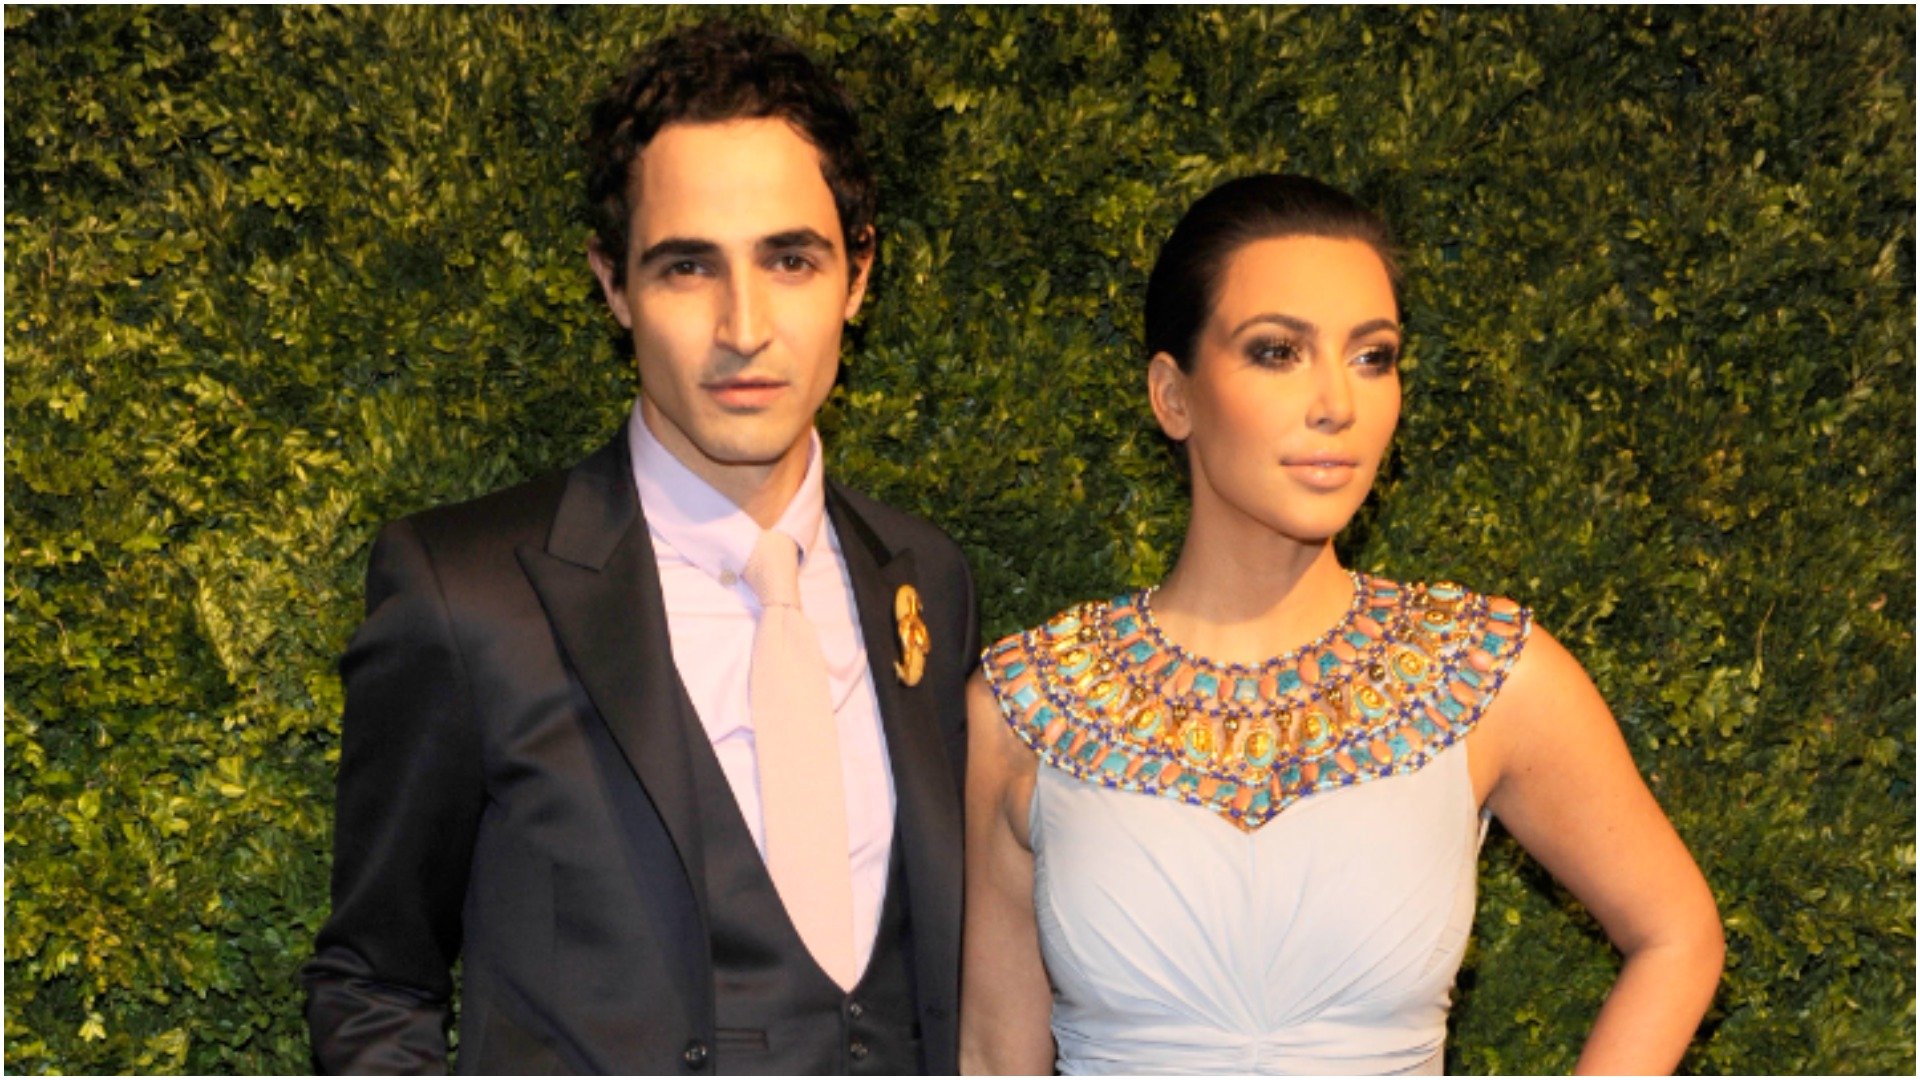 Zac Posen and Kim Kardashian attended the Vogue Fashion Fund Award in 2010 and pose for a photo